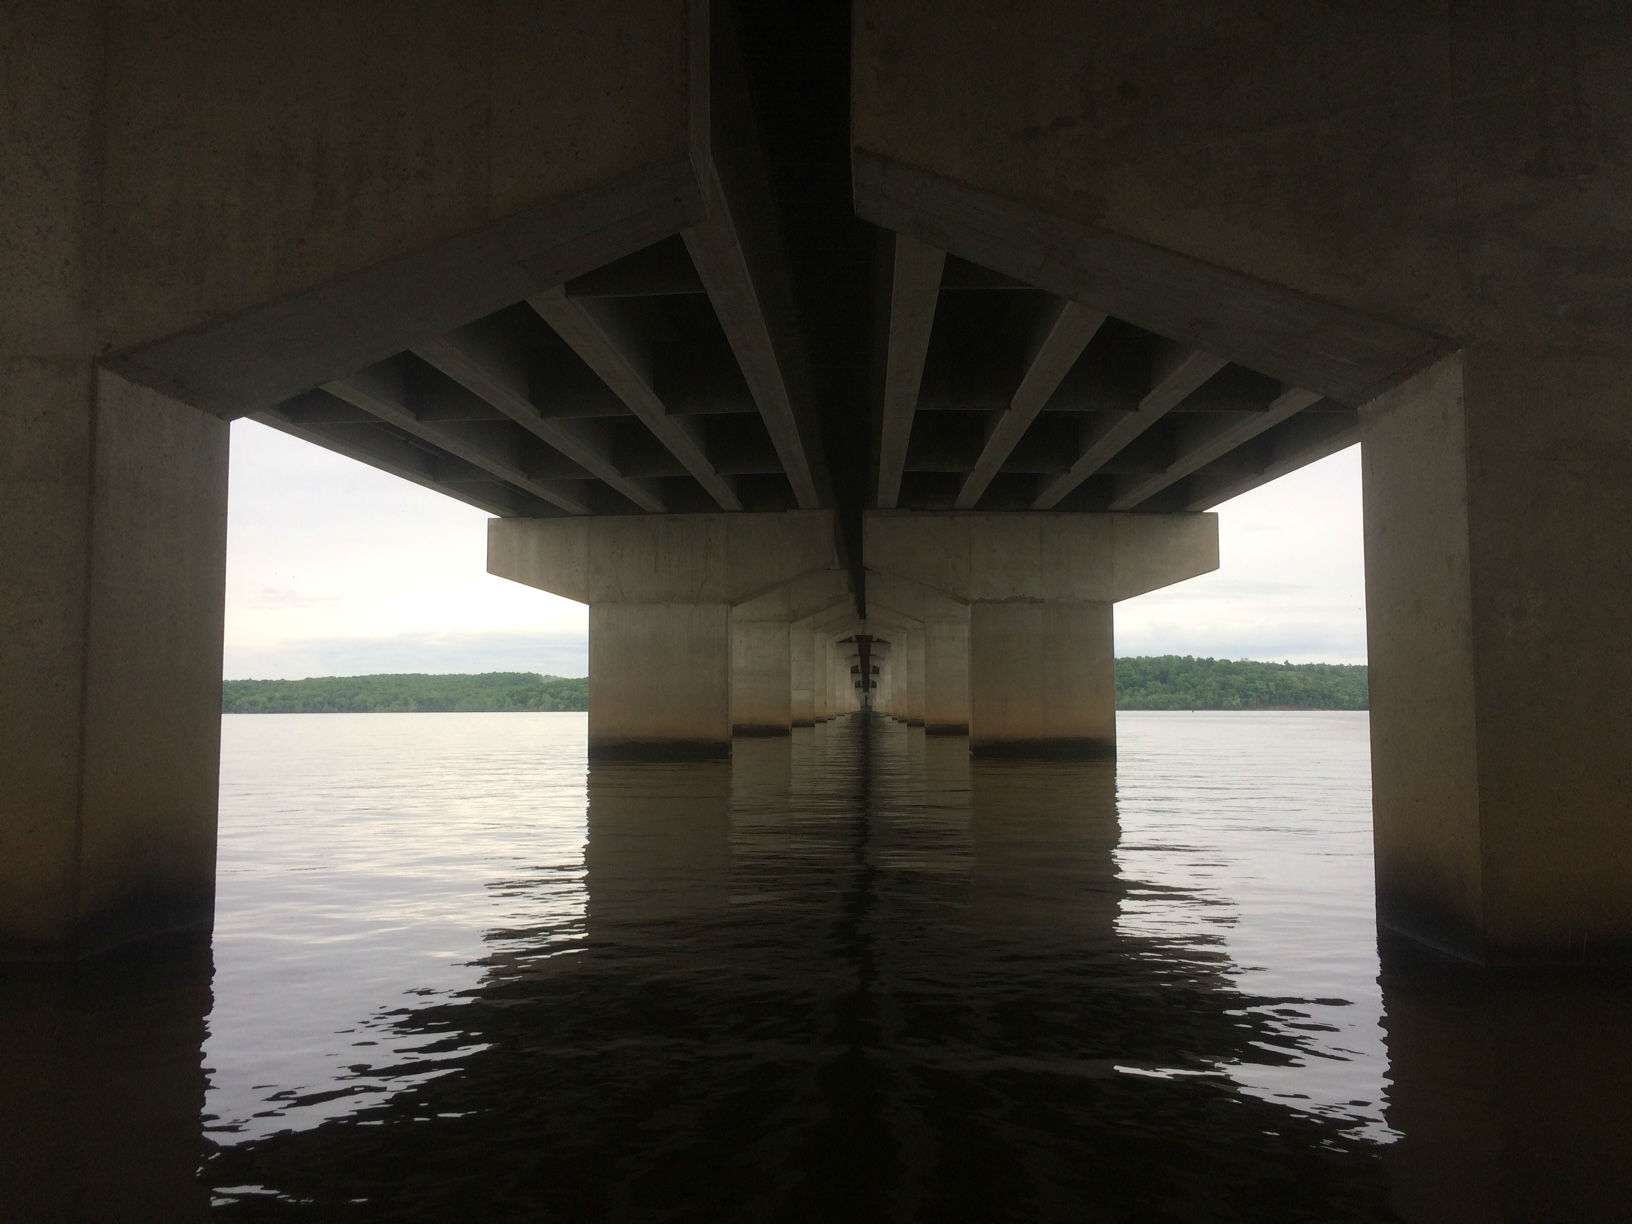 Fishing under a bridge can be a unique perspective.